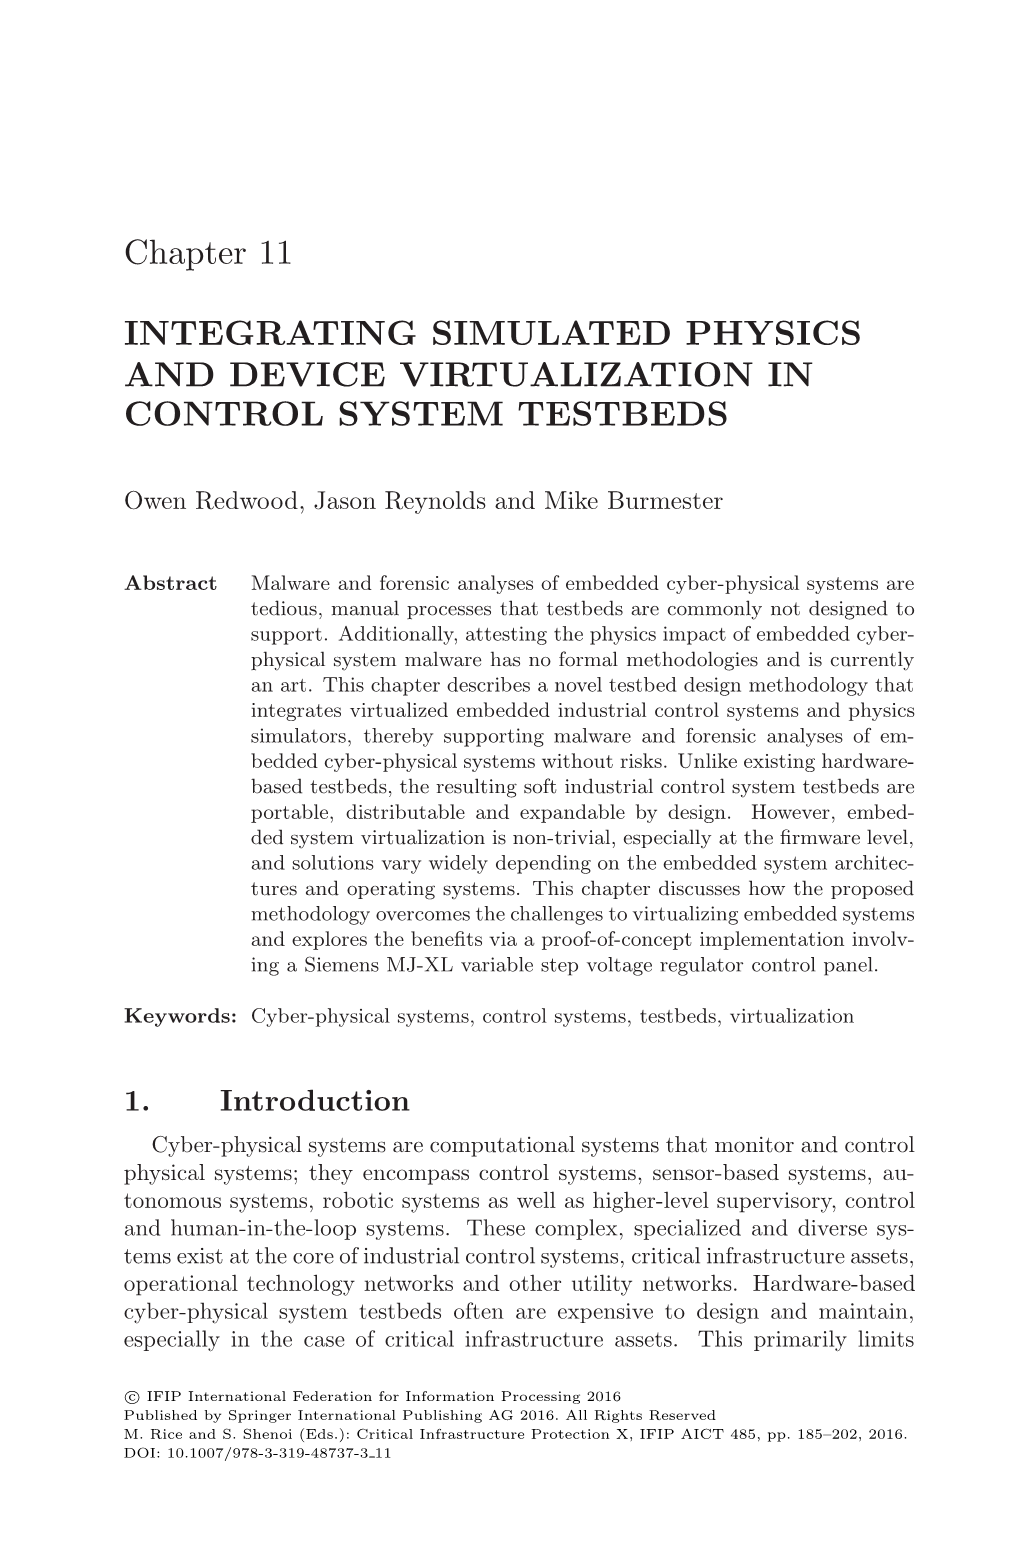 Integrating Simulated Physics and Device Virtualization in Control System Testbeds